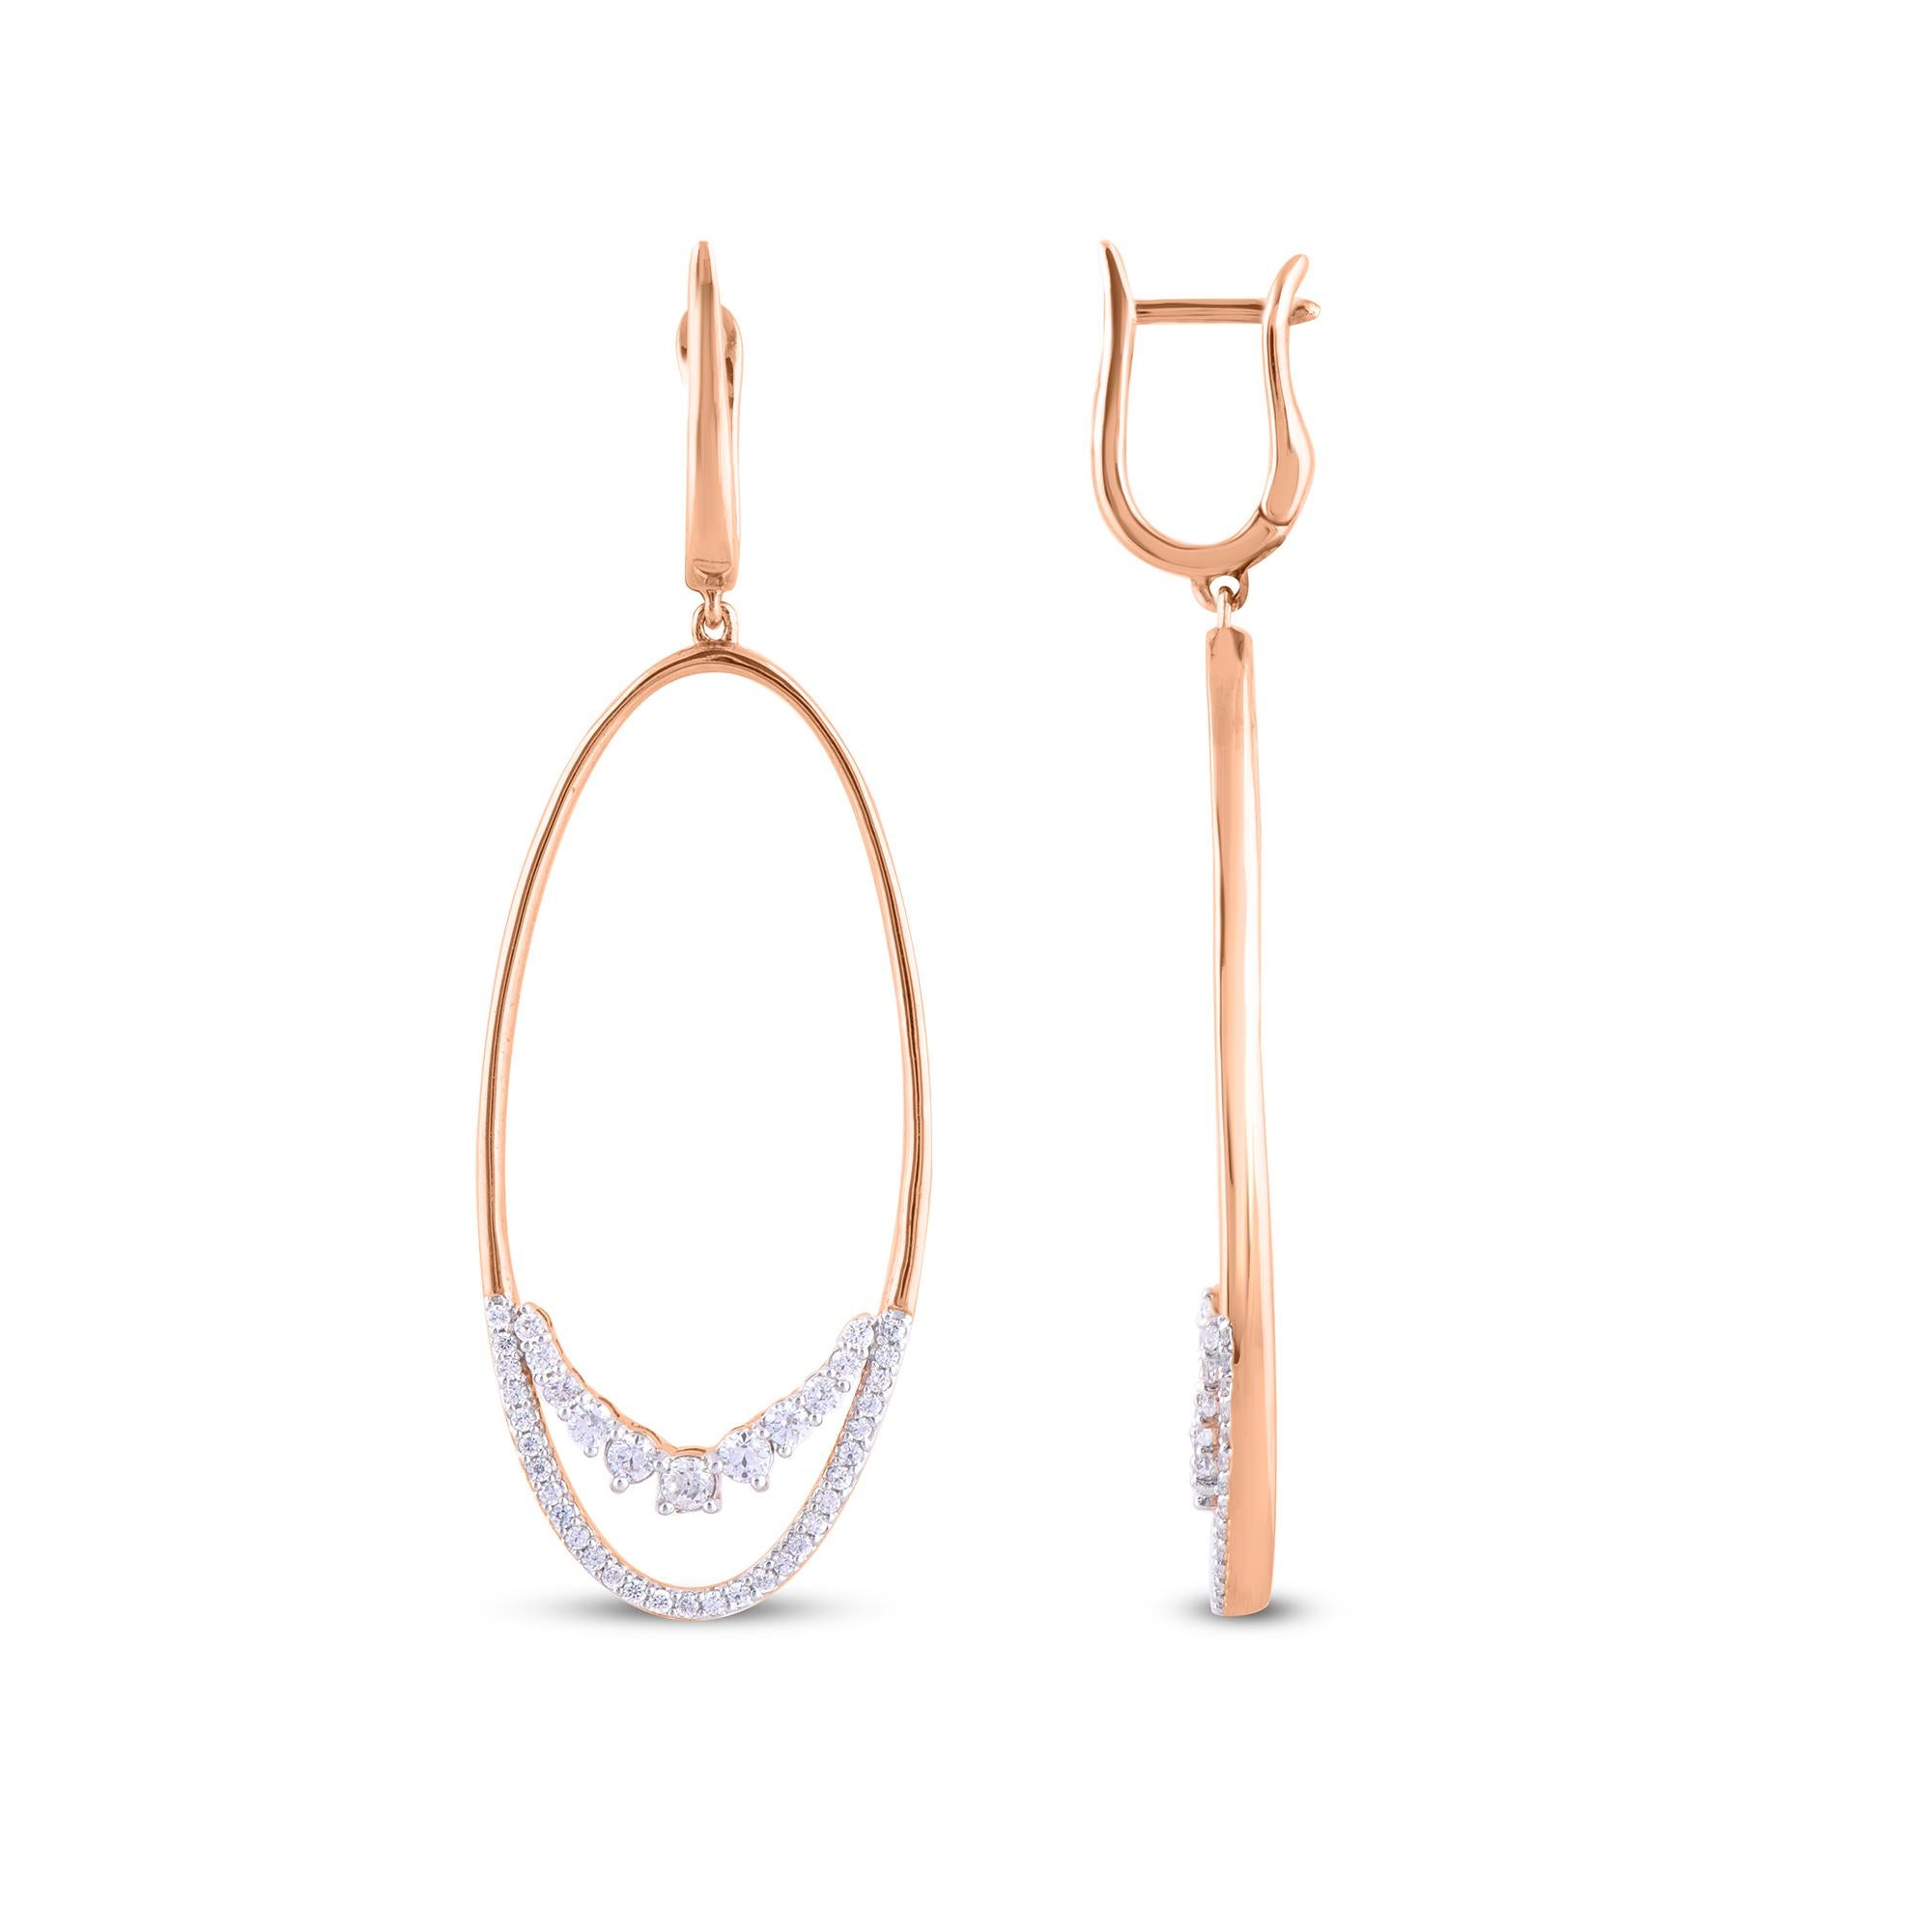 Smart and unique, this diamond oval drop earrings are certain to be notice. Made by our skillful craftsmen in 14 karat rose gold and accentuated with 80 round diamond in prong setting, which shines in H-I color I2 clarity. Polished to a bright